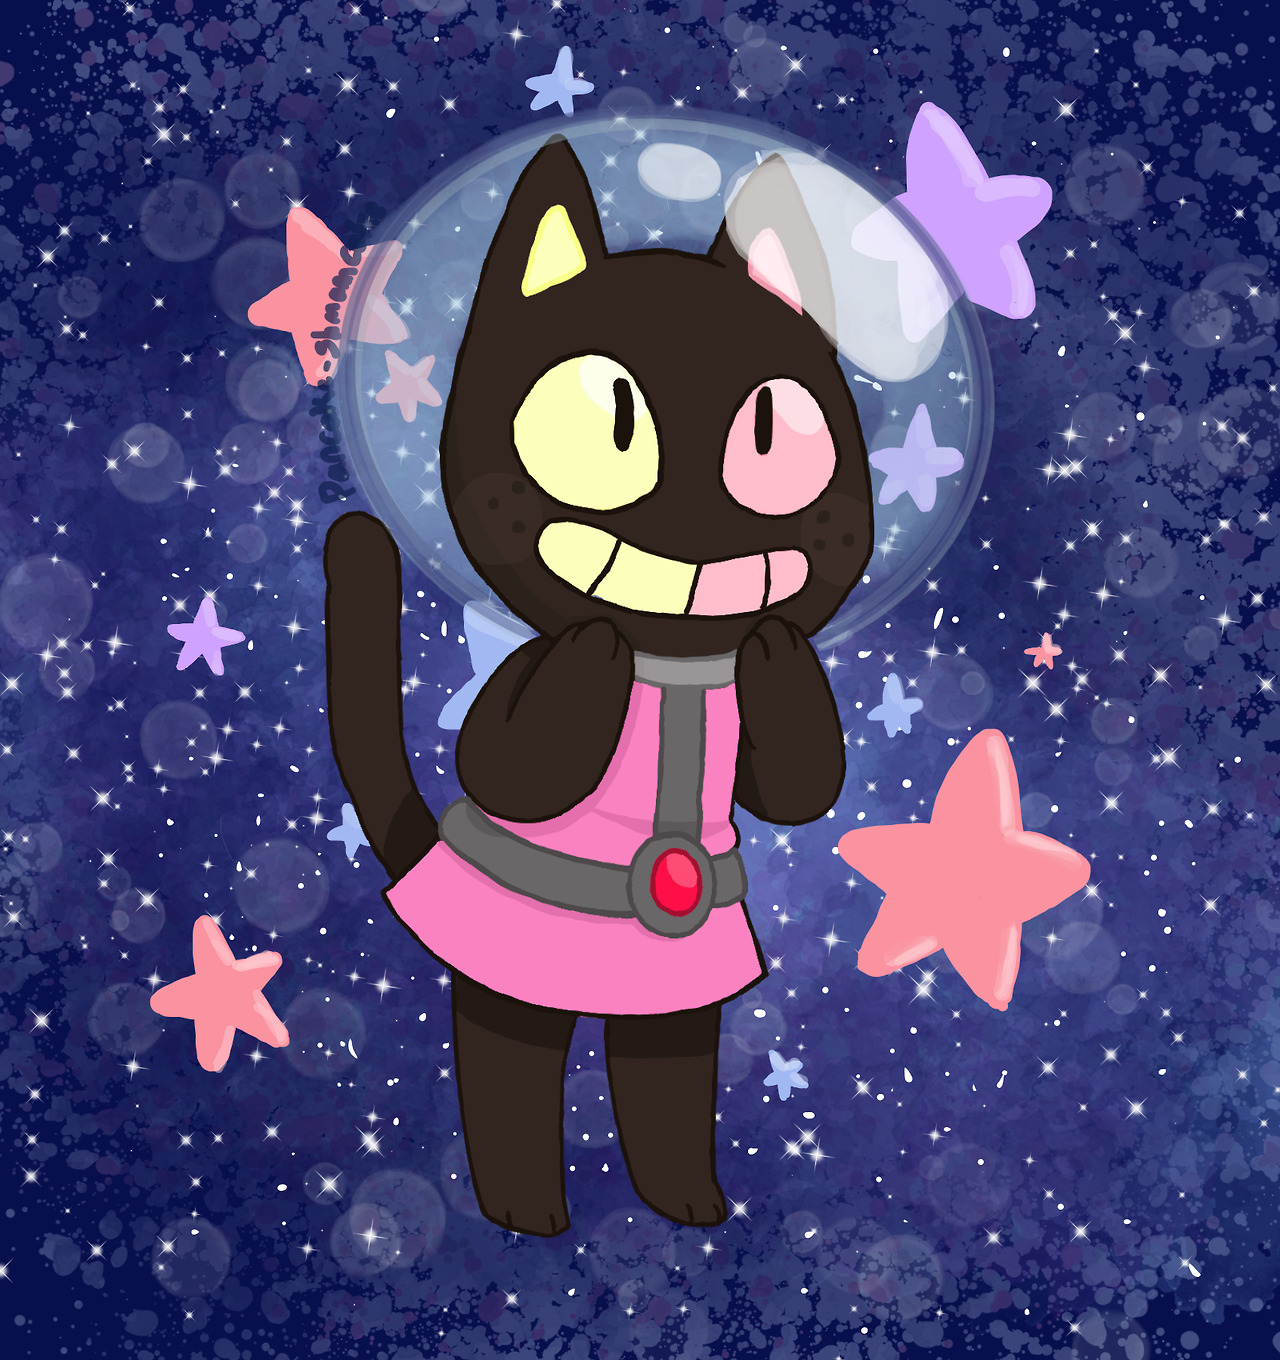 I…. I just wanted to doodle cookiecat as an animal crossing character…. It got a bit out of hand he would have a lazy personality